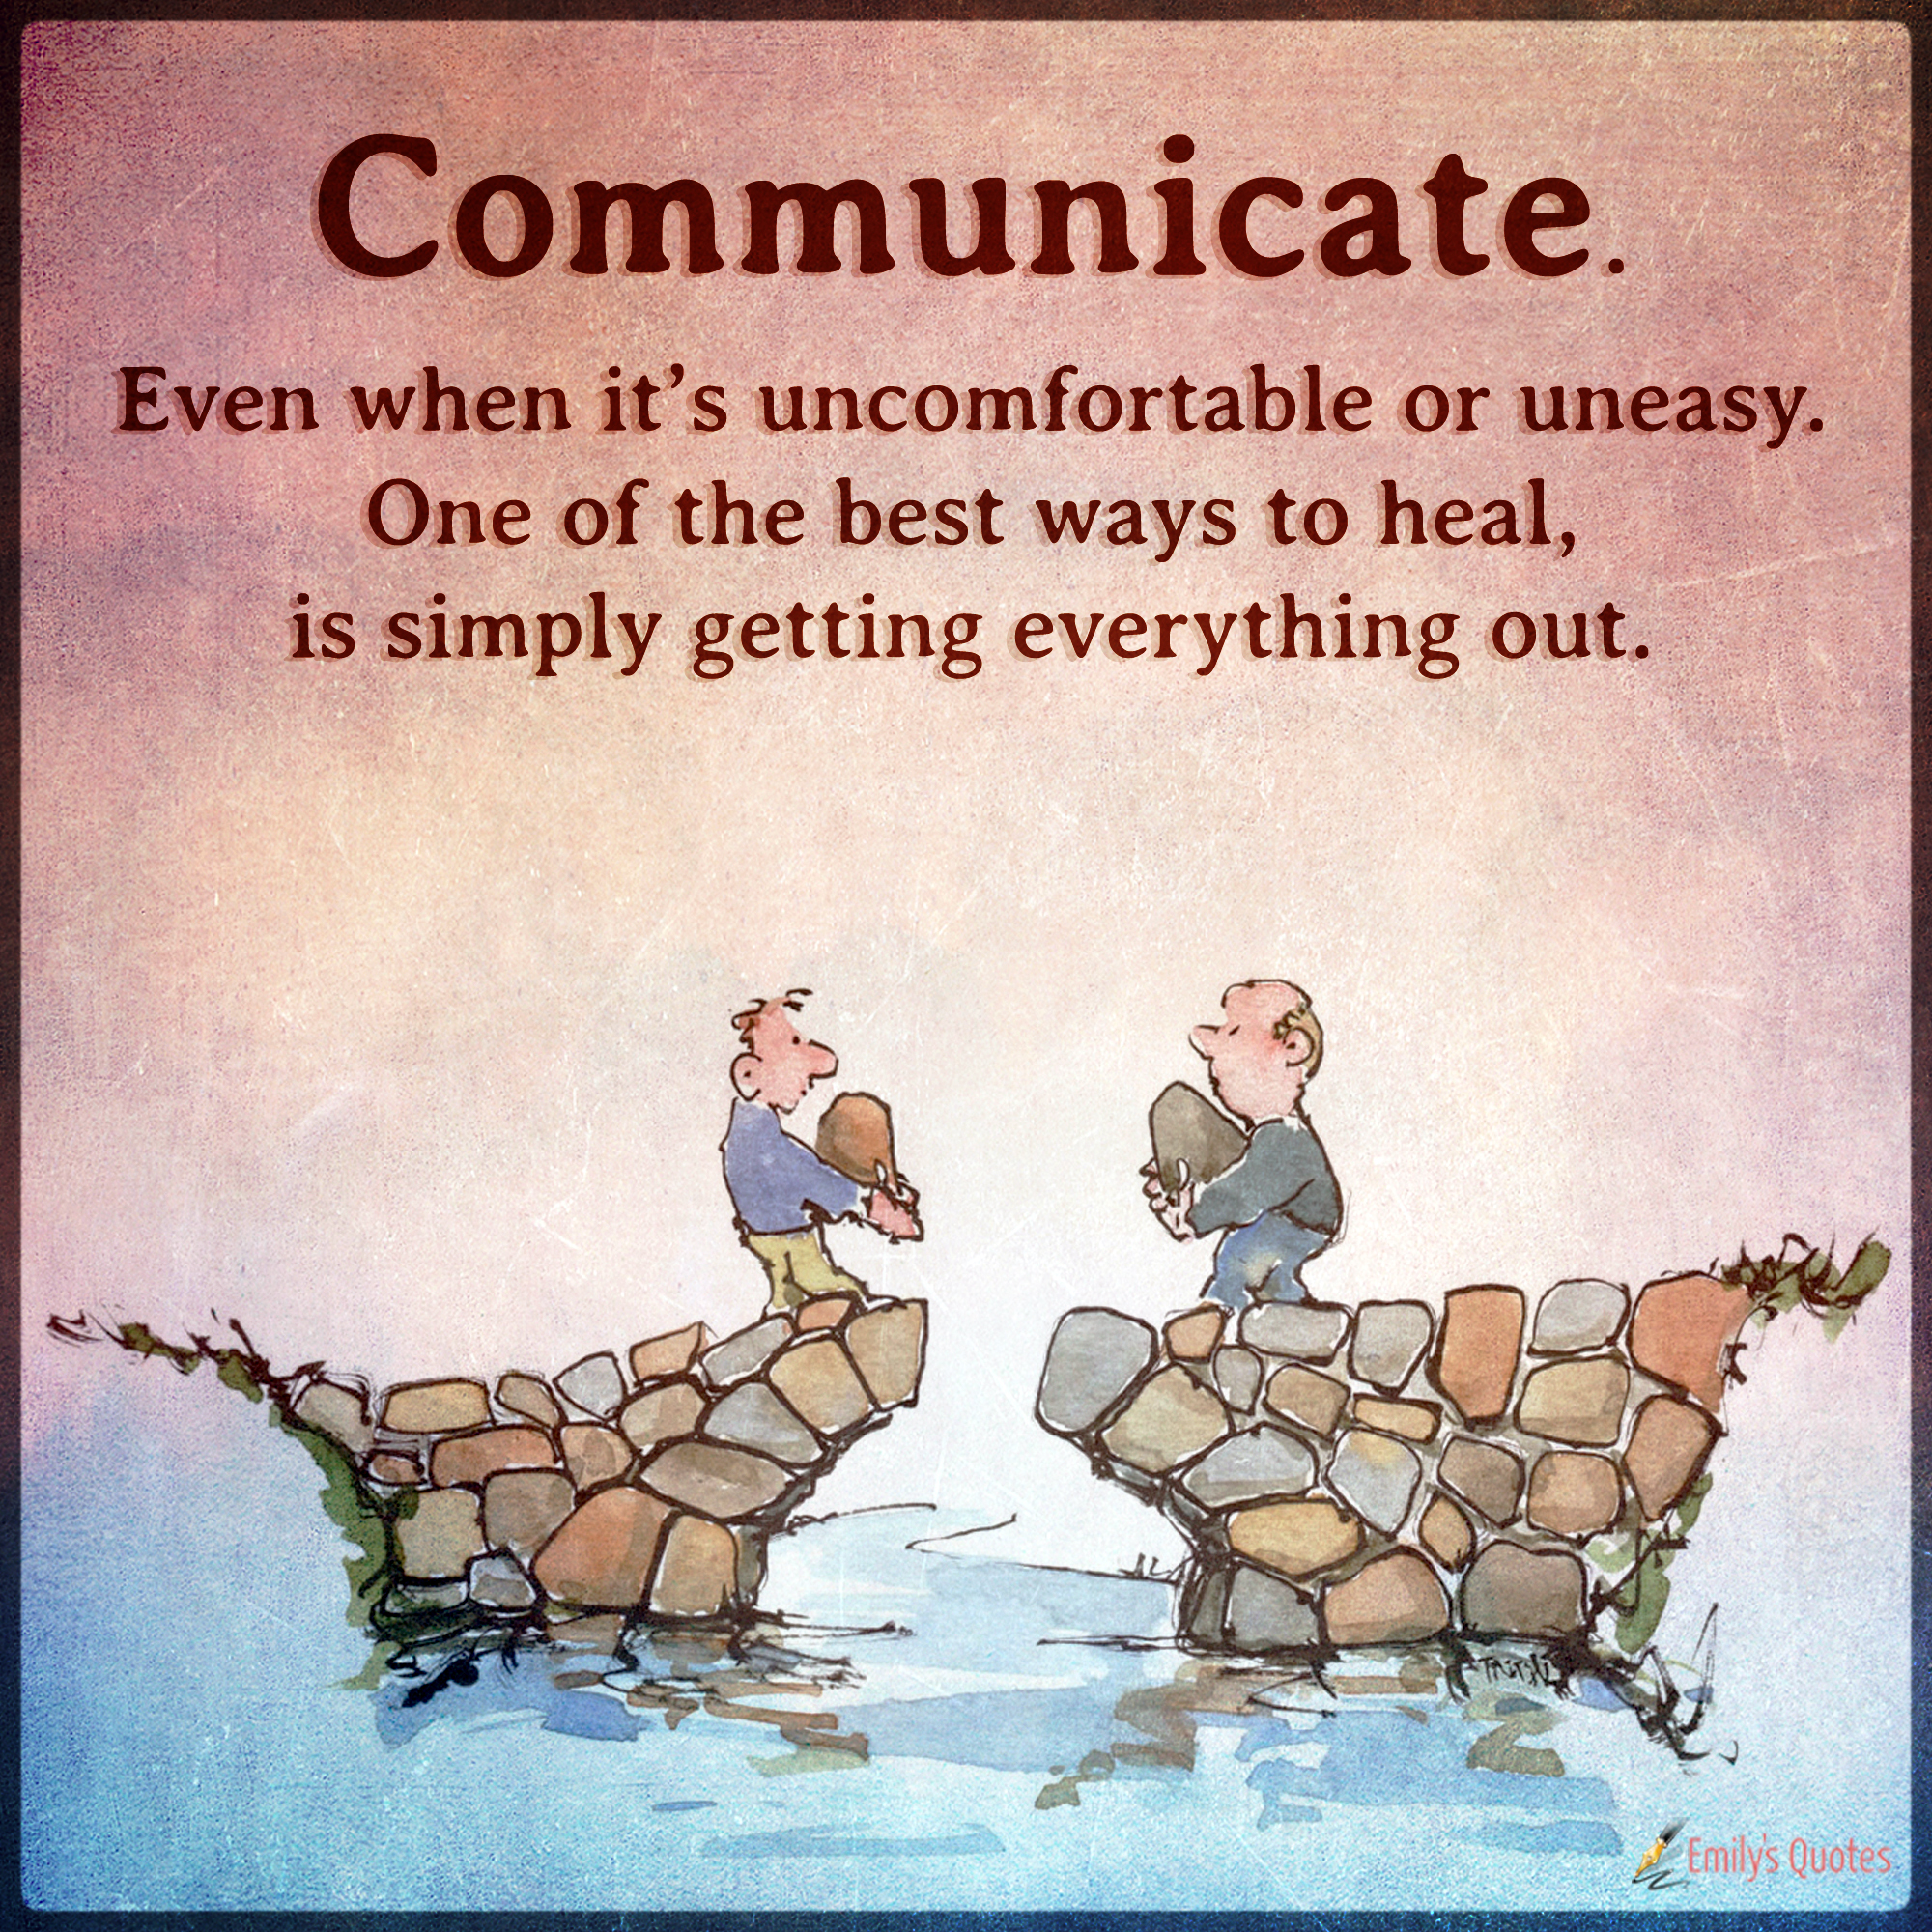 Communicate. Even when it’s uncomfortable or uneasy. One of the best